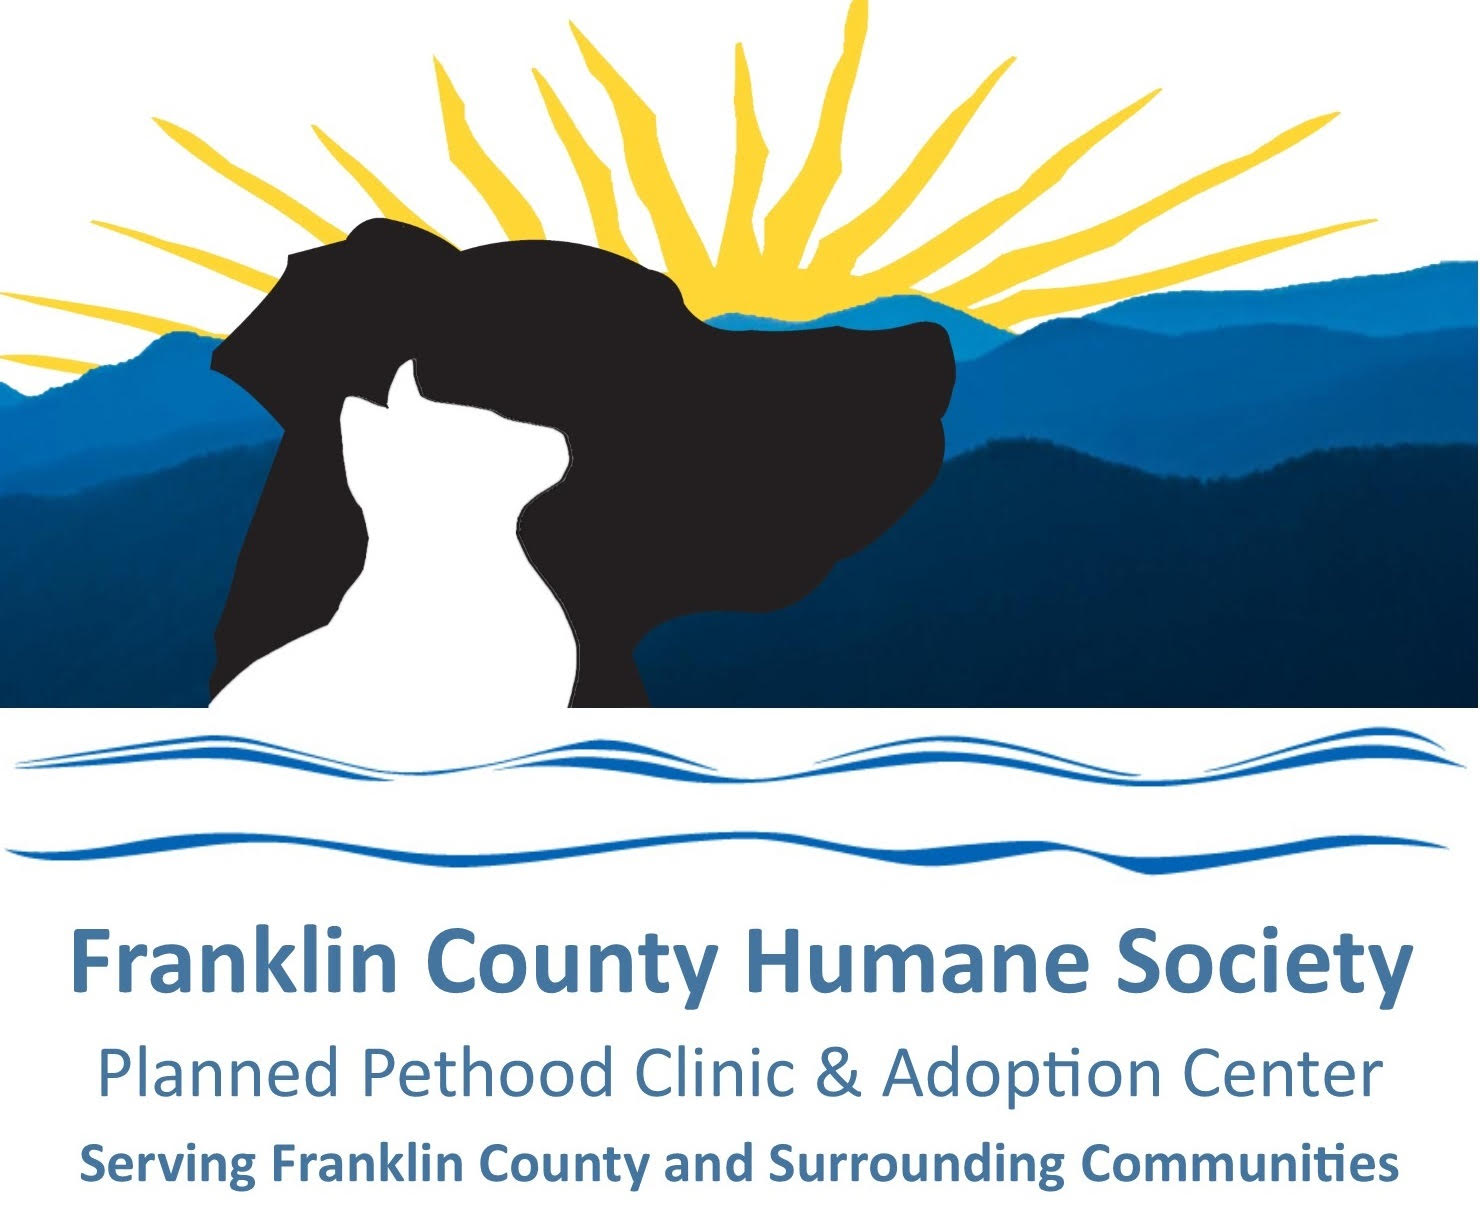 Planned Pethood Clinic &amp; Adoption Center/Franklin County Humane Society